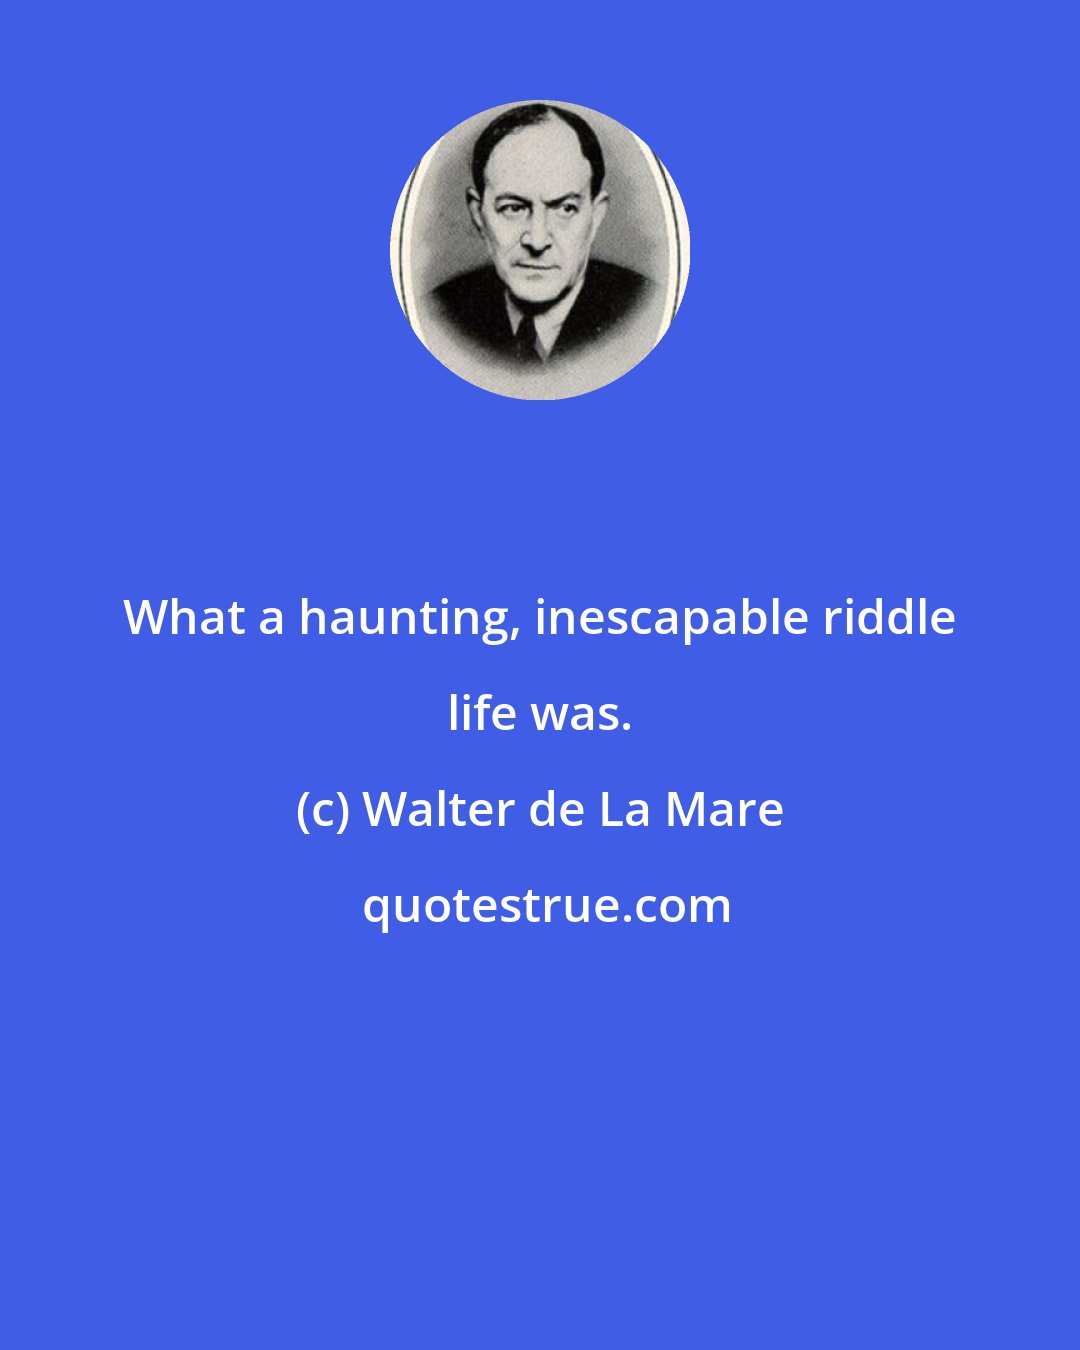 Walter de La Mare: What a haunting, inescapable riddle life was.